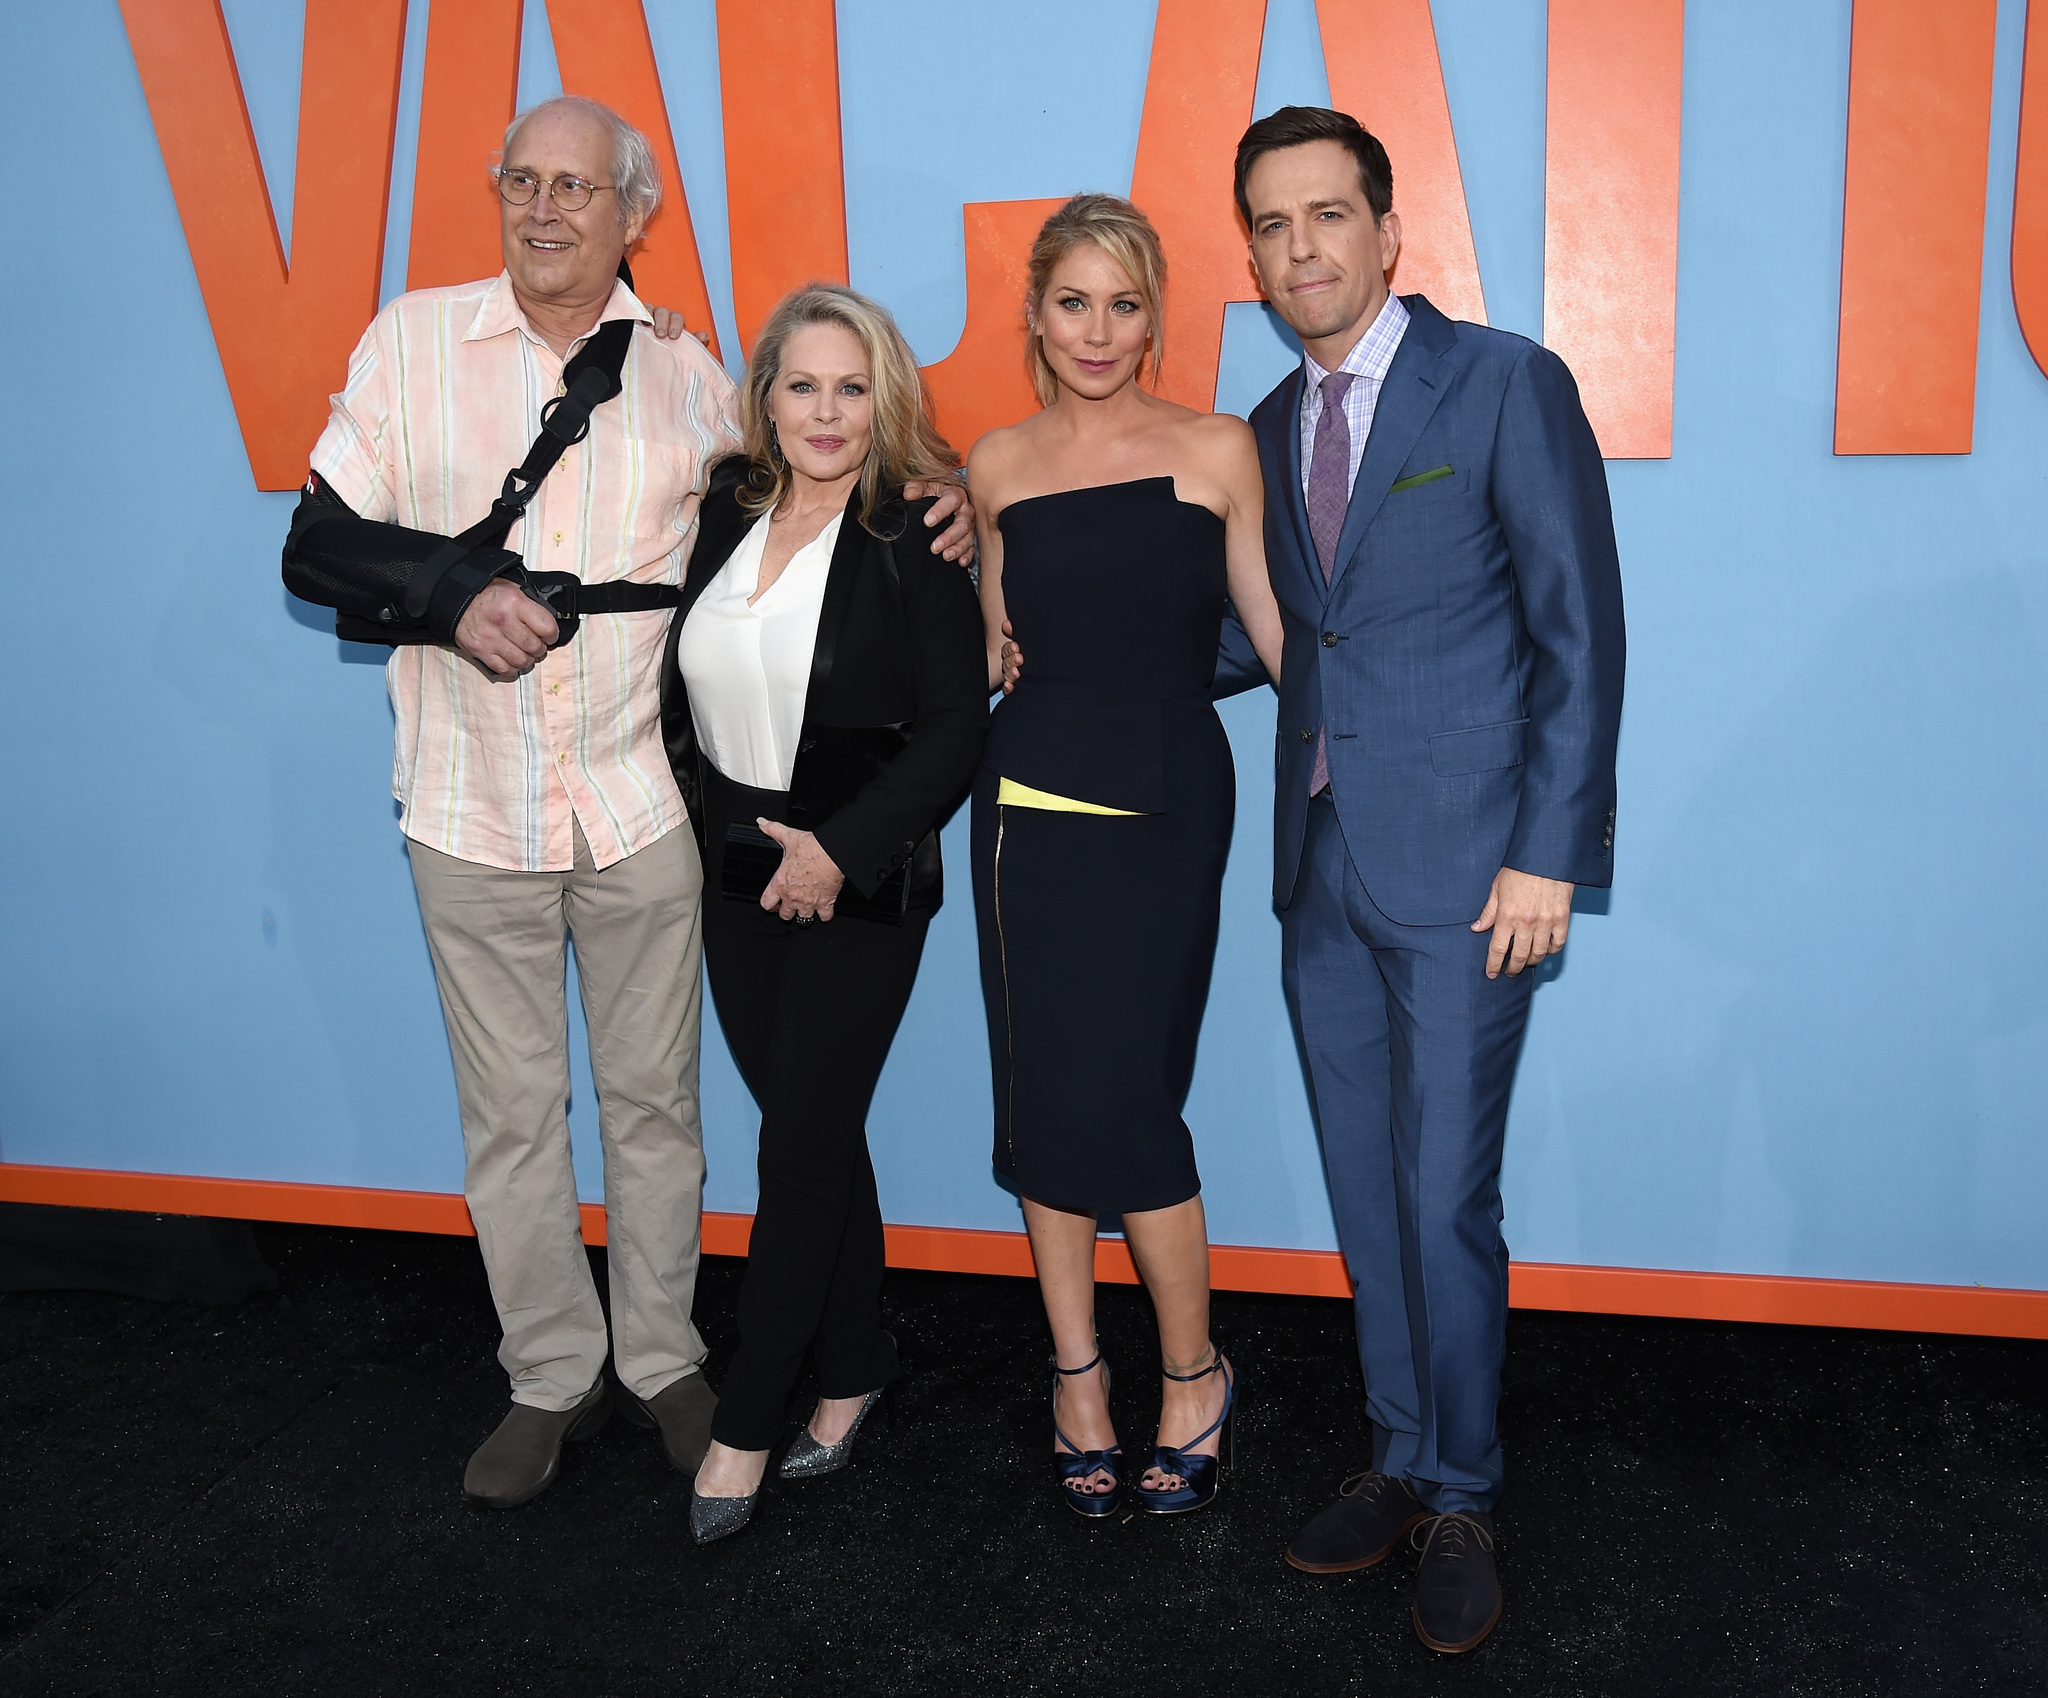 Chevy Chase, Beverly D'Angelo, Christina Applegate and Ed Helms at event of Kvaisu atostogos (2015)